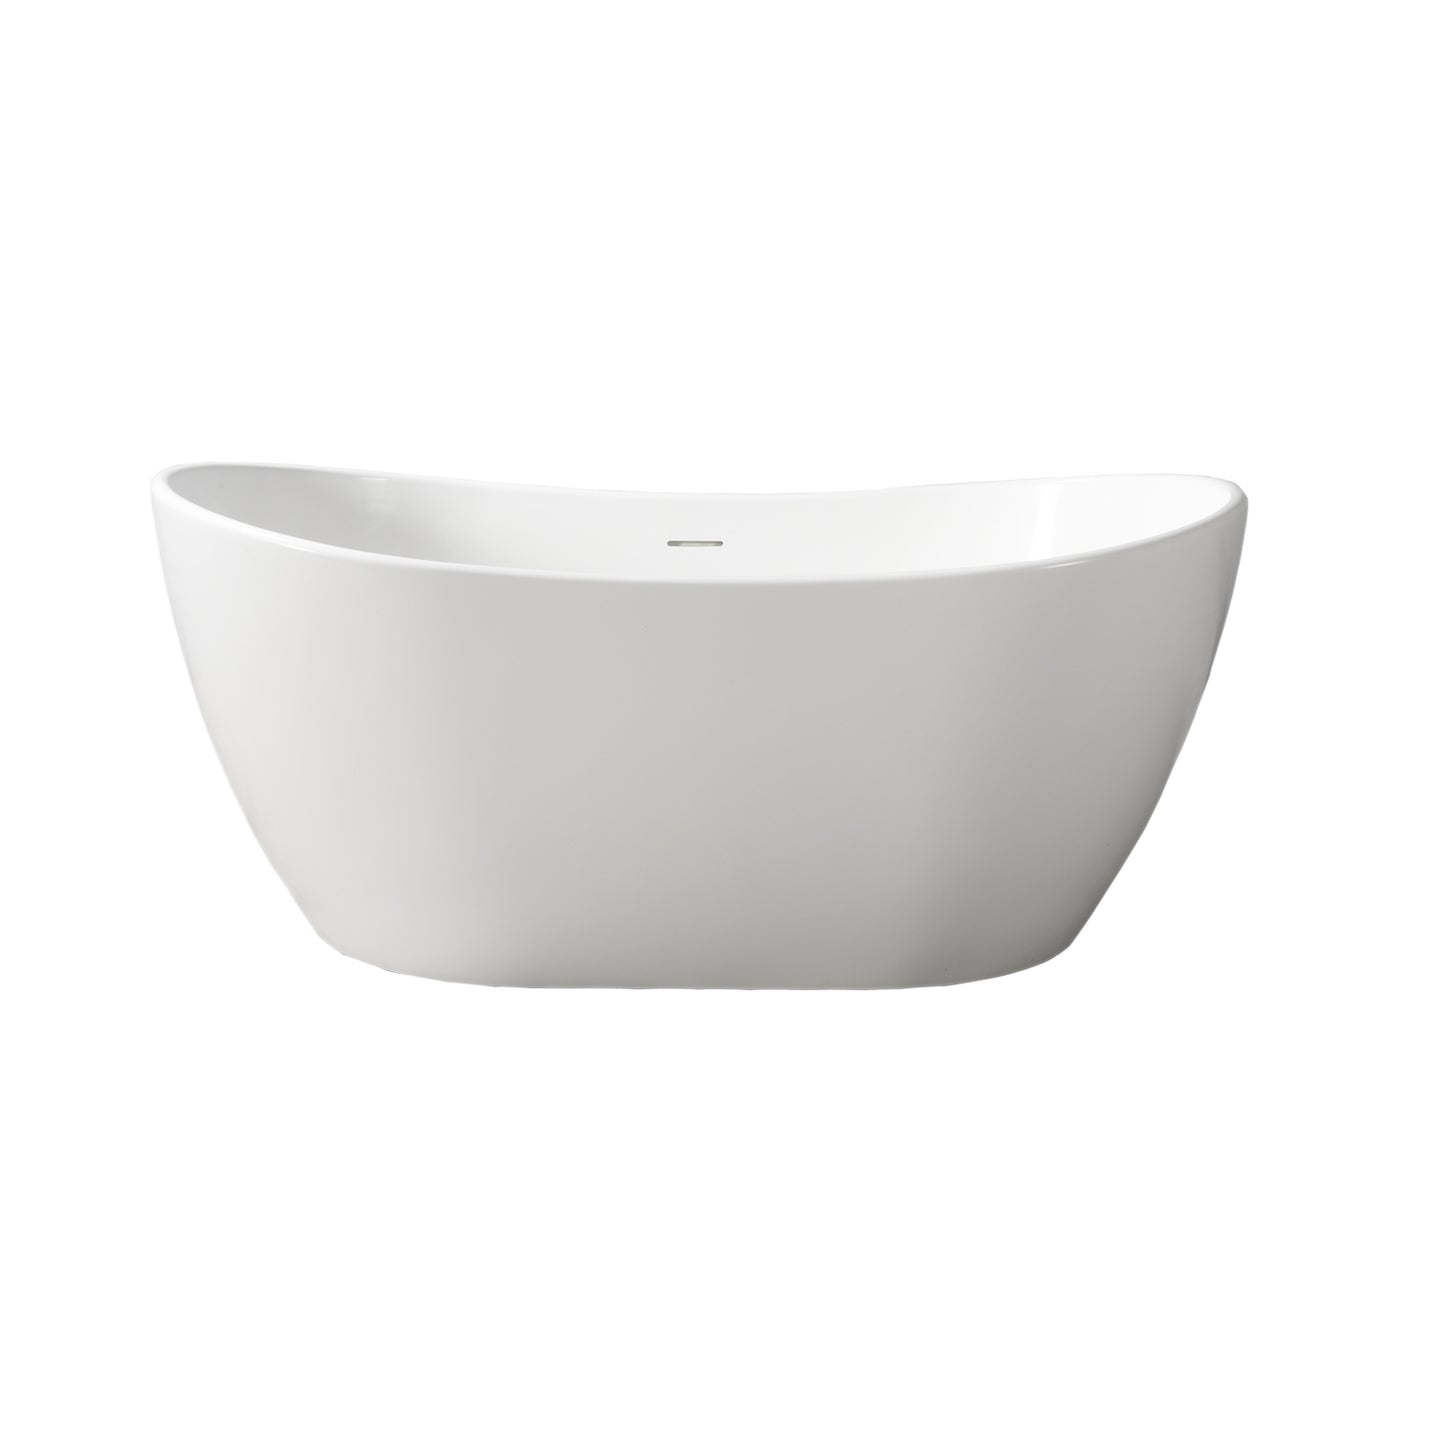 Edison 56" Resin Double Slipper Tub with Overflow No Faucet Holes Gloss White